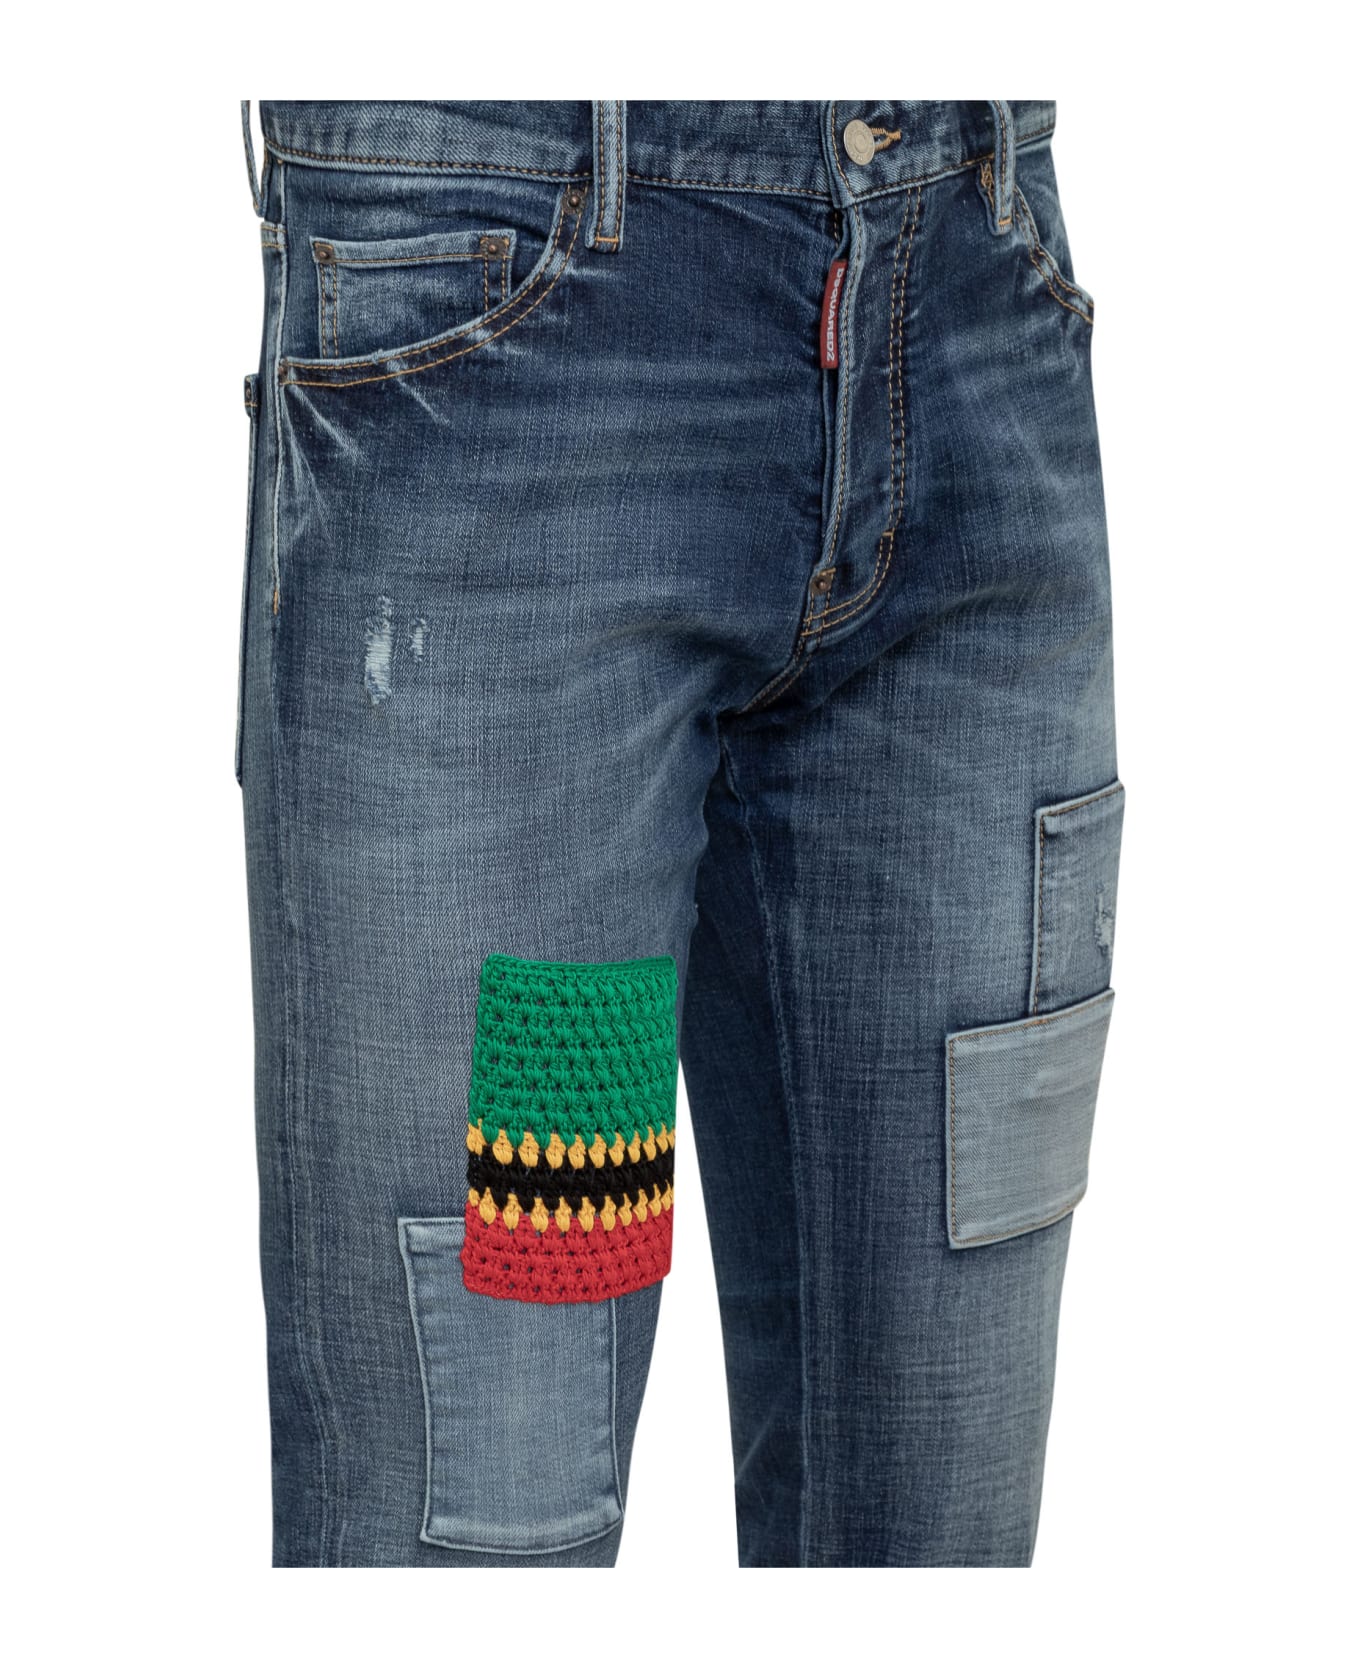 Dsquared2 Jamaica Jeans - NAVY BLUE